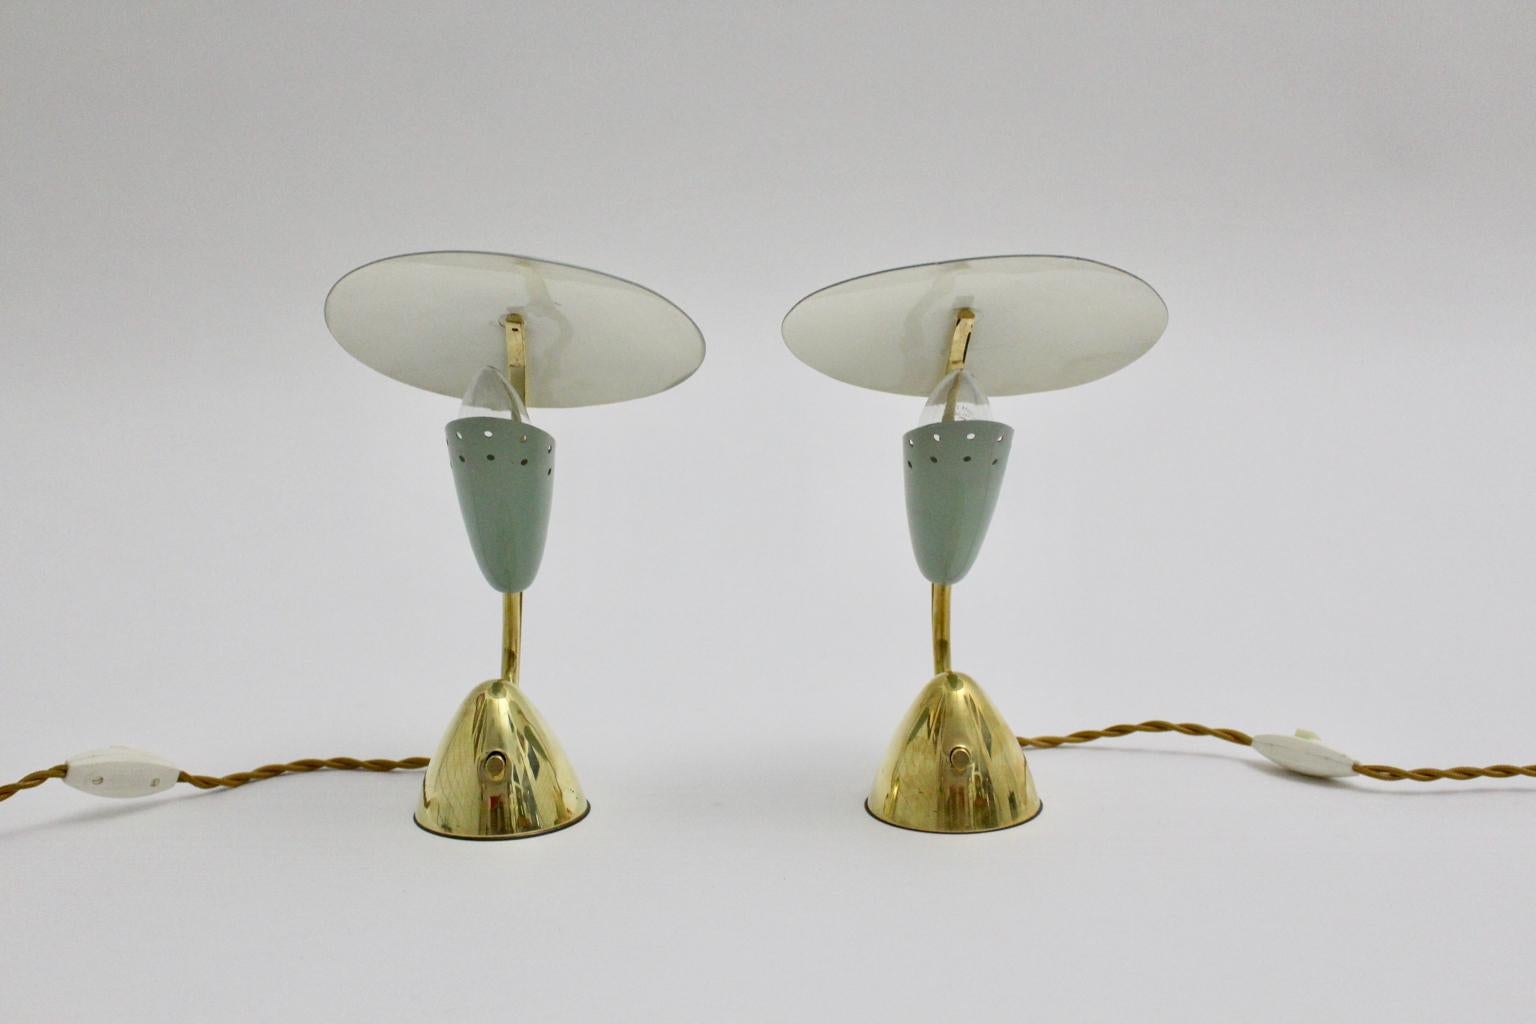 Mid-20th Century Mid-Century Modern Green Metal Vintage Bedside Lamps by Arredoluce 1950s, Italy